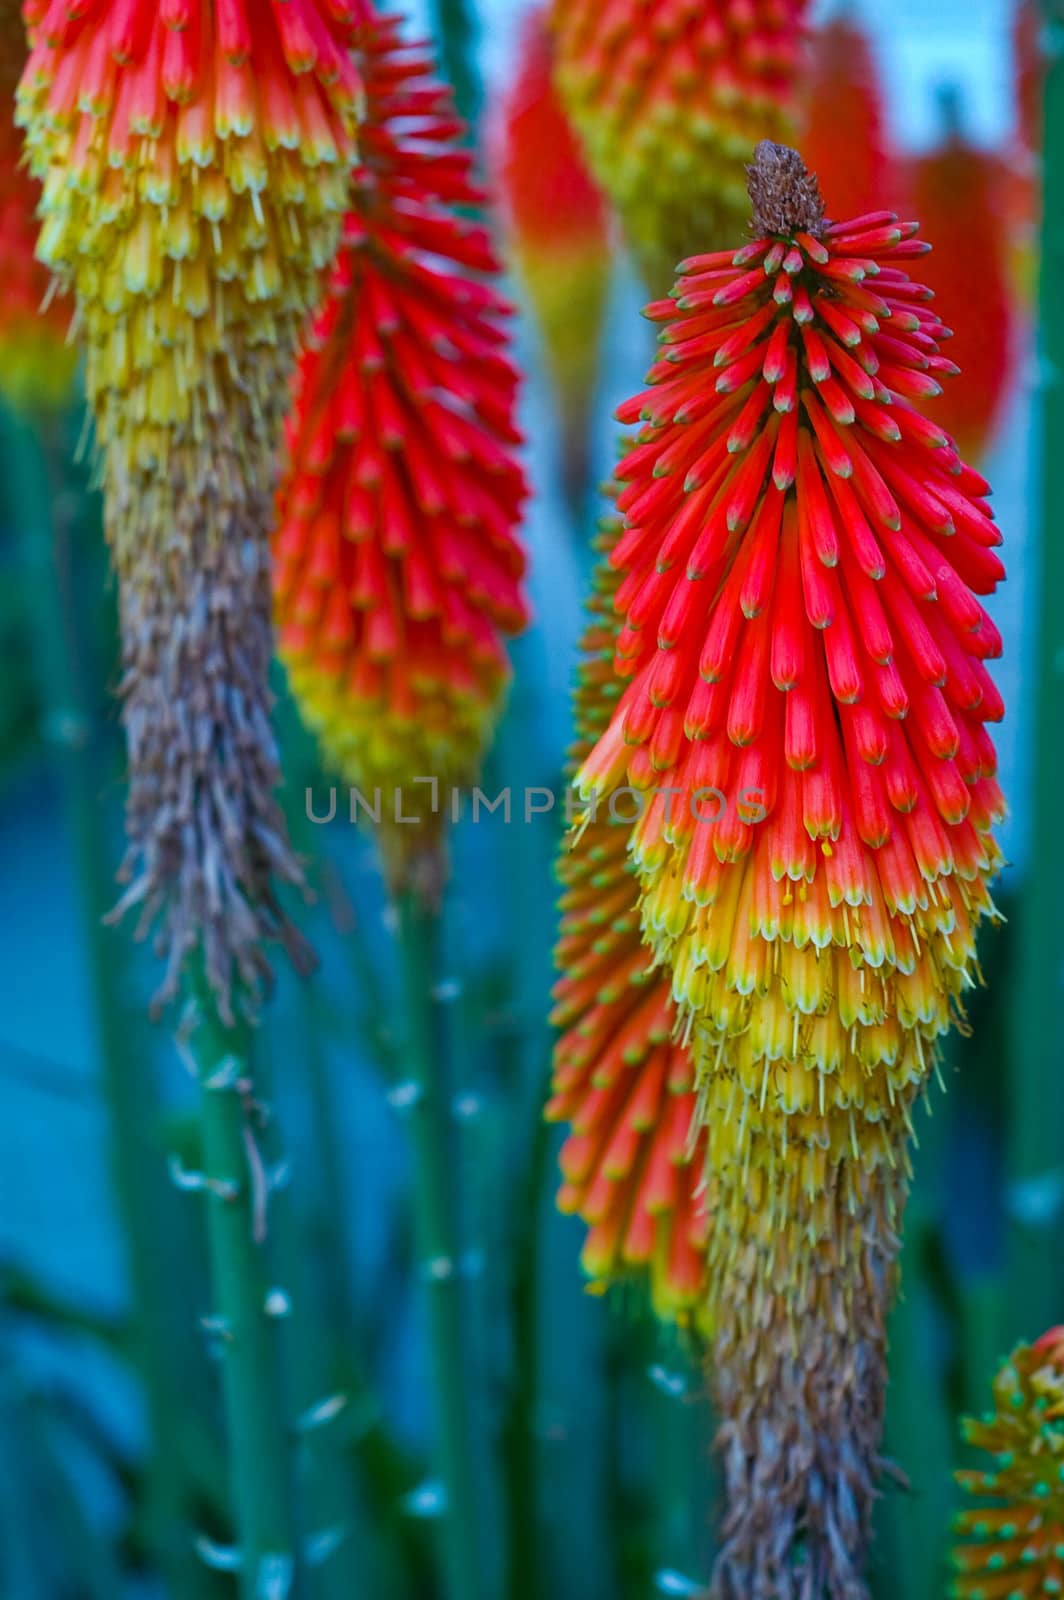 Redx Hot Pokers, photographed in unknown garden